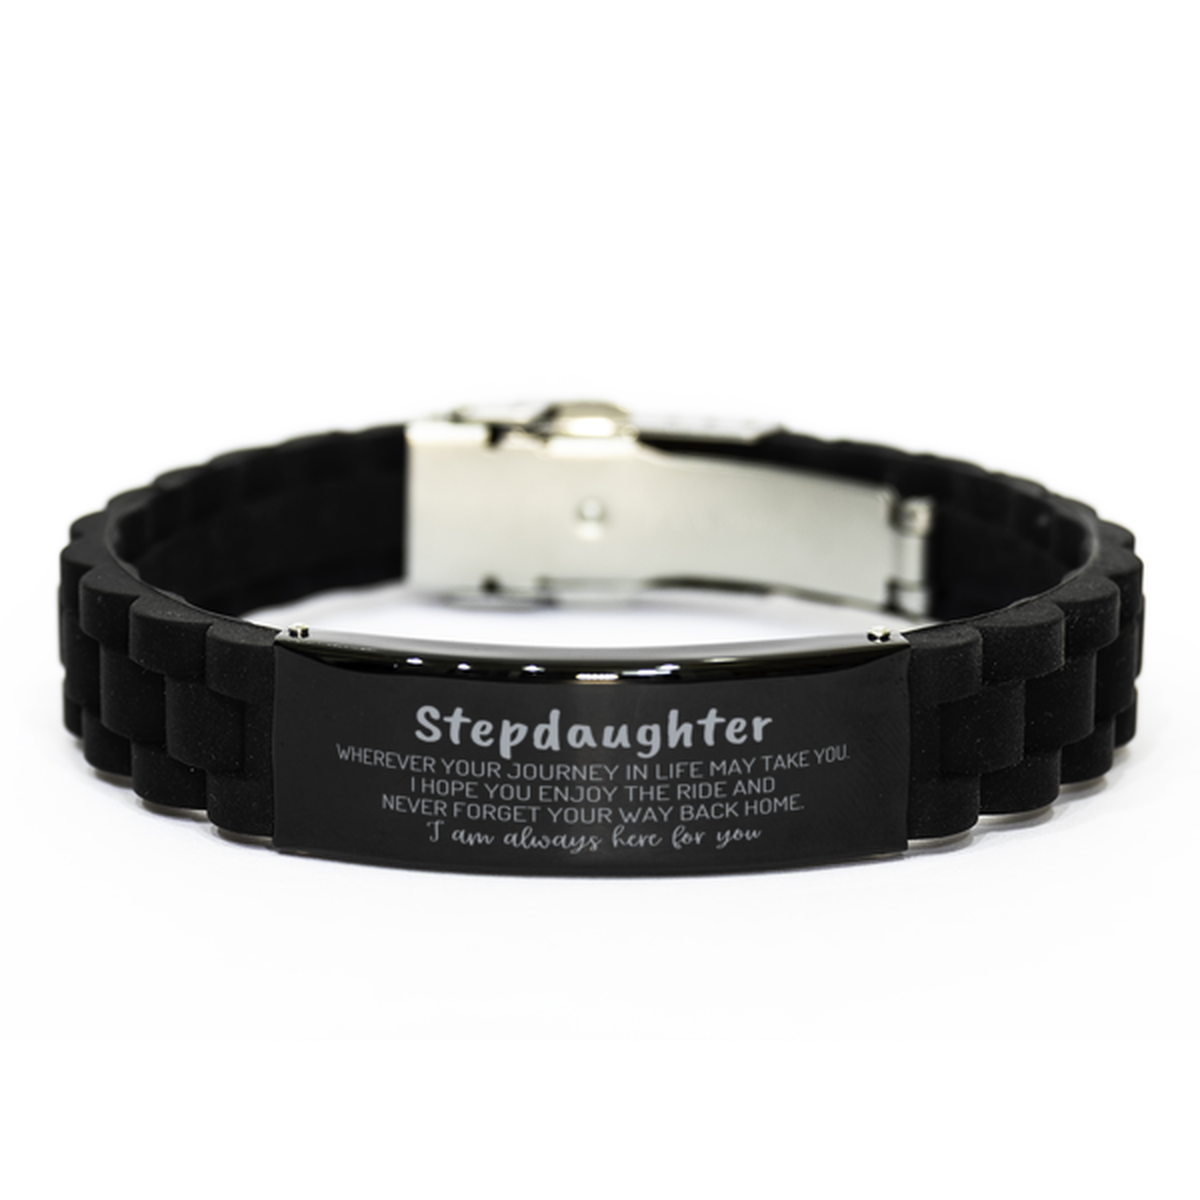 Stepdaughter wherever your journey in life may take you, I am always here for you Stepdaughter Black Glidelock Clasp Bracelet, Awesome Christmas Gifts For Stepdaughter, Stepdaughter Birthday Gifts for Men Women Family Loved One